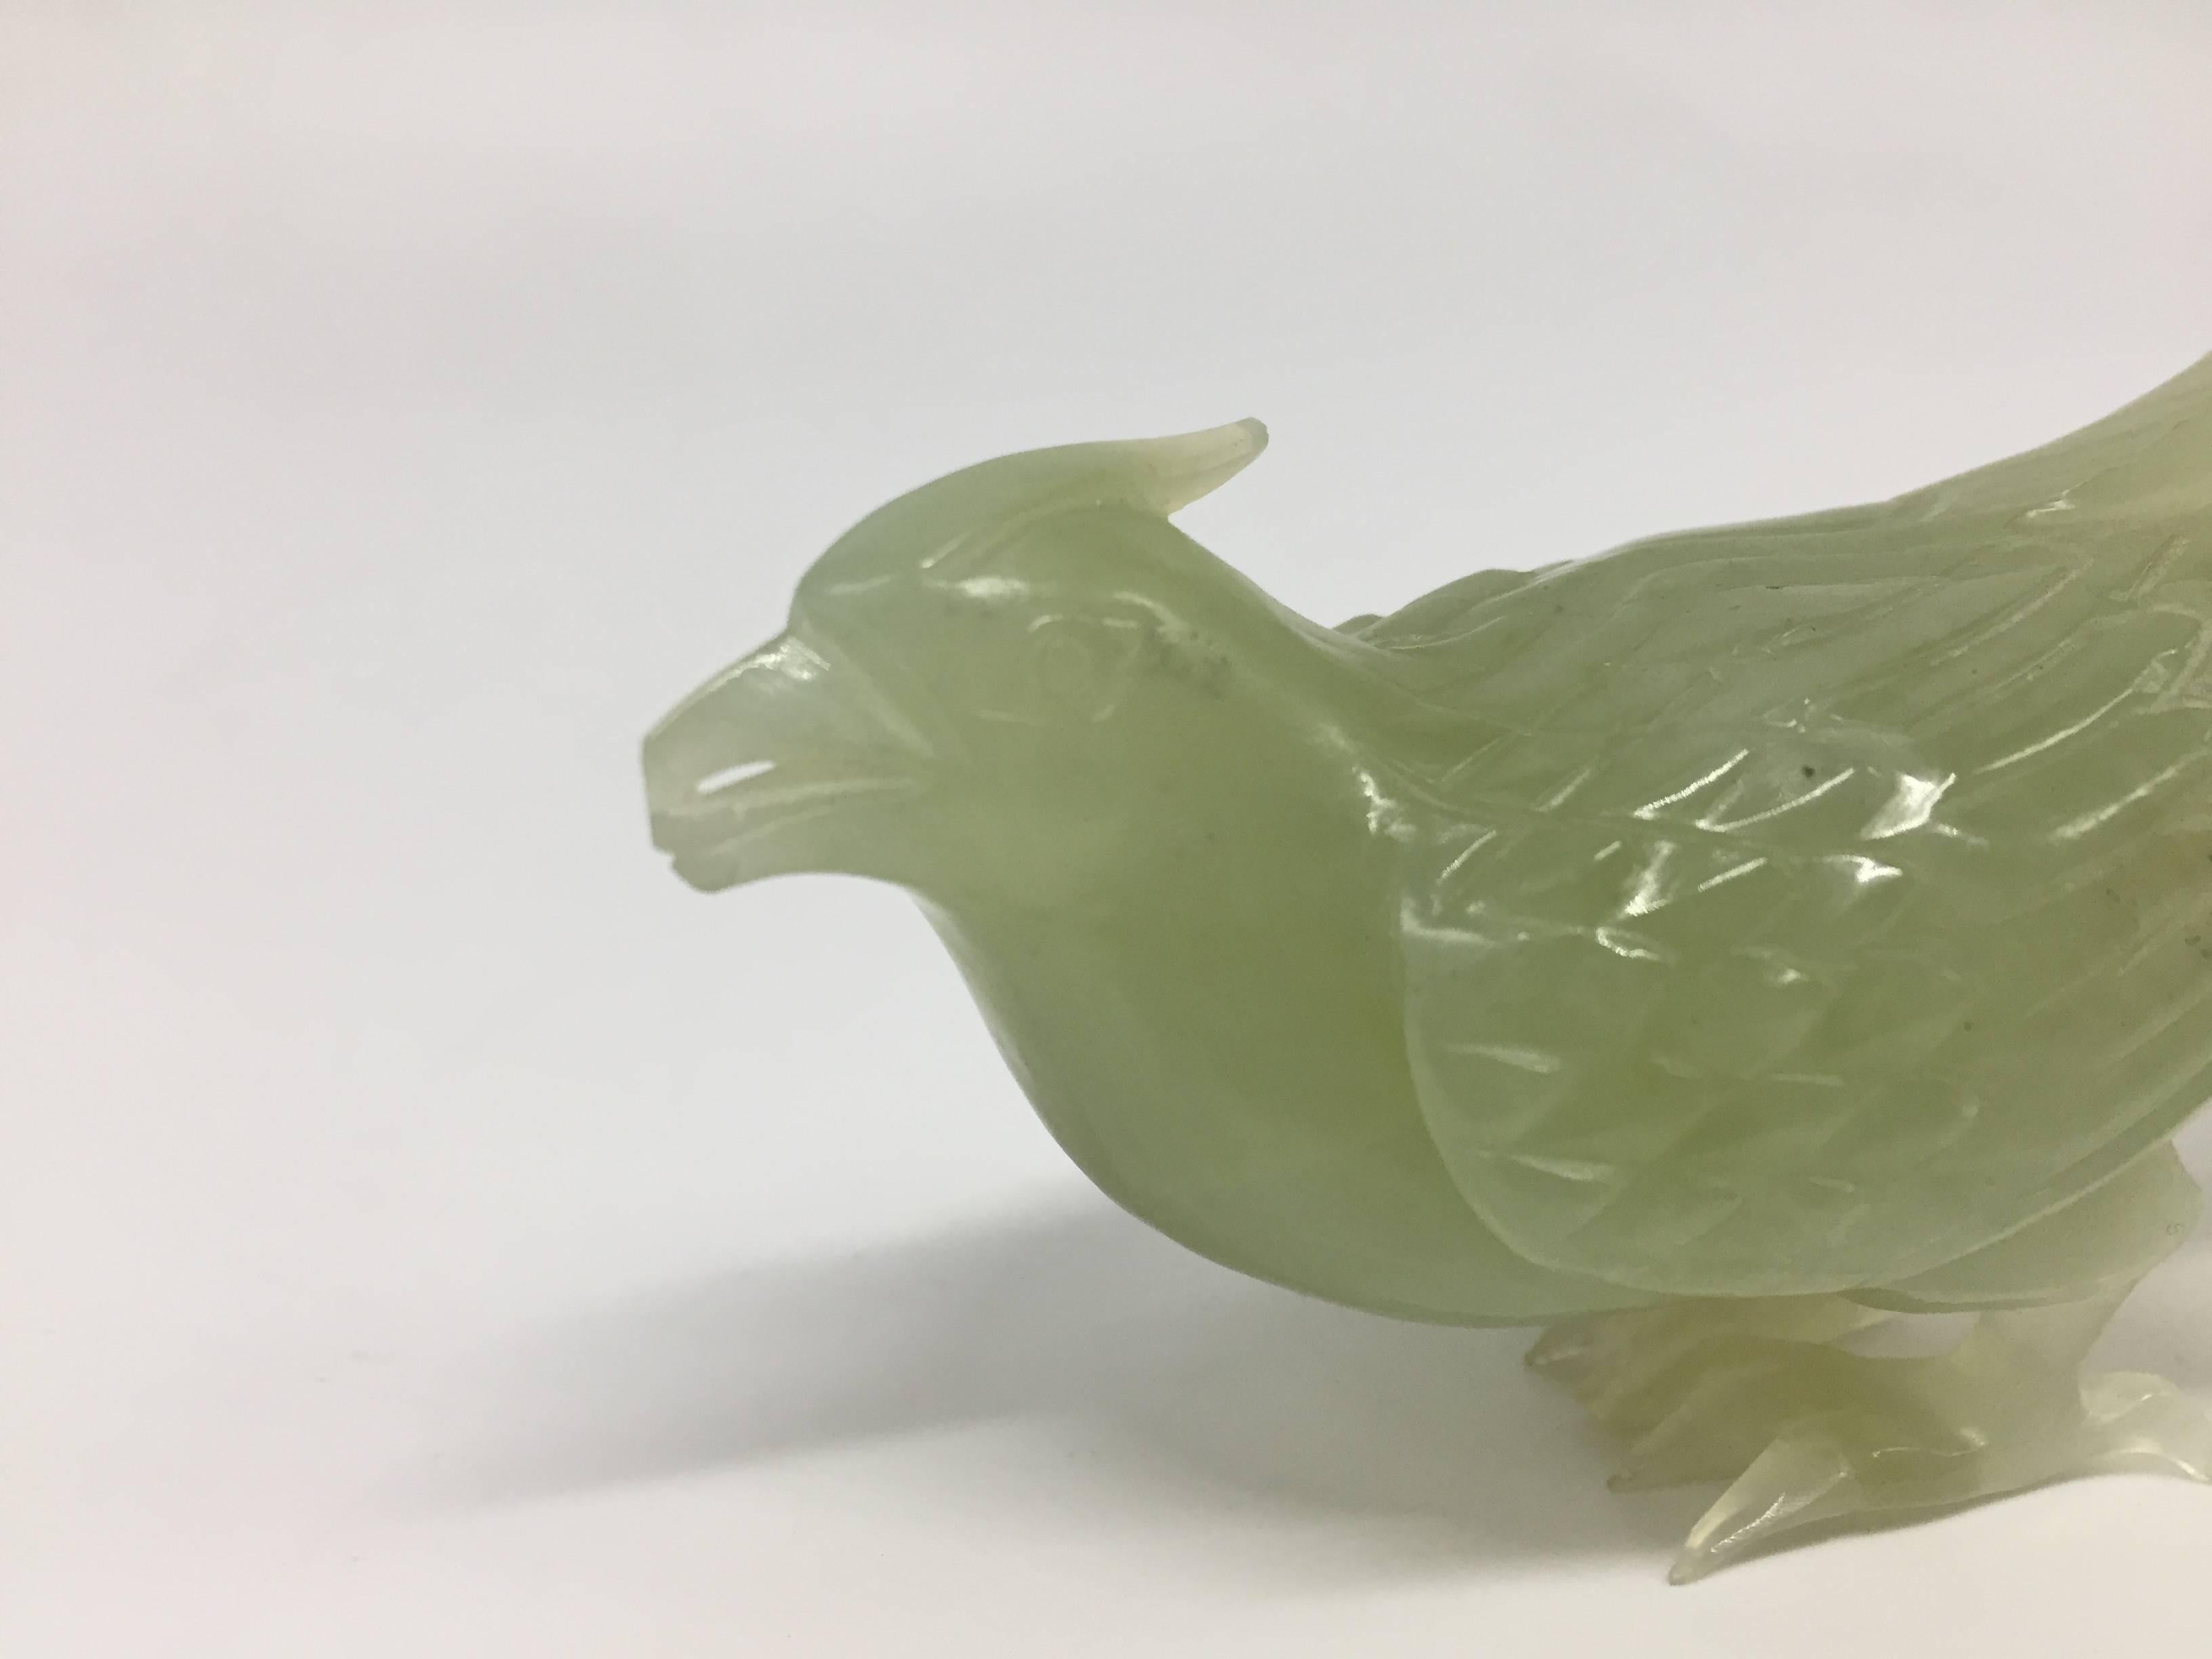 Exquisite peasant is carved from a block of all natural green Xiu Yu, in China regarded as a type of jade. The bird's feathers, beak and claws are very finely done. Its expression is vivid and lively. 

Peasant in the Chinese culture is regarded as